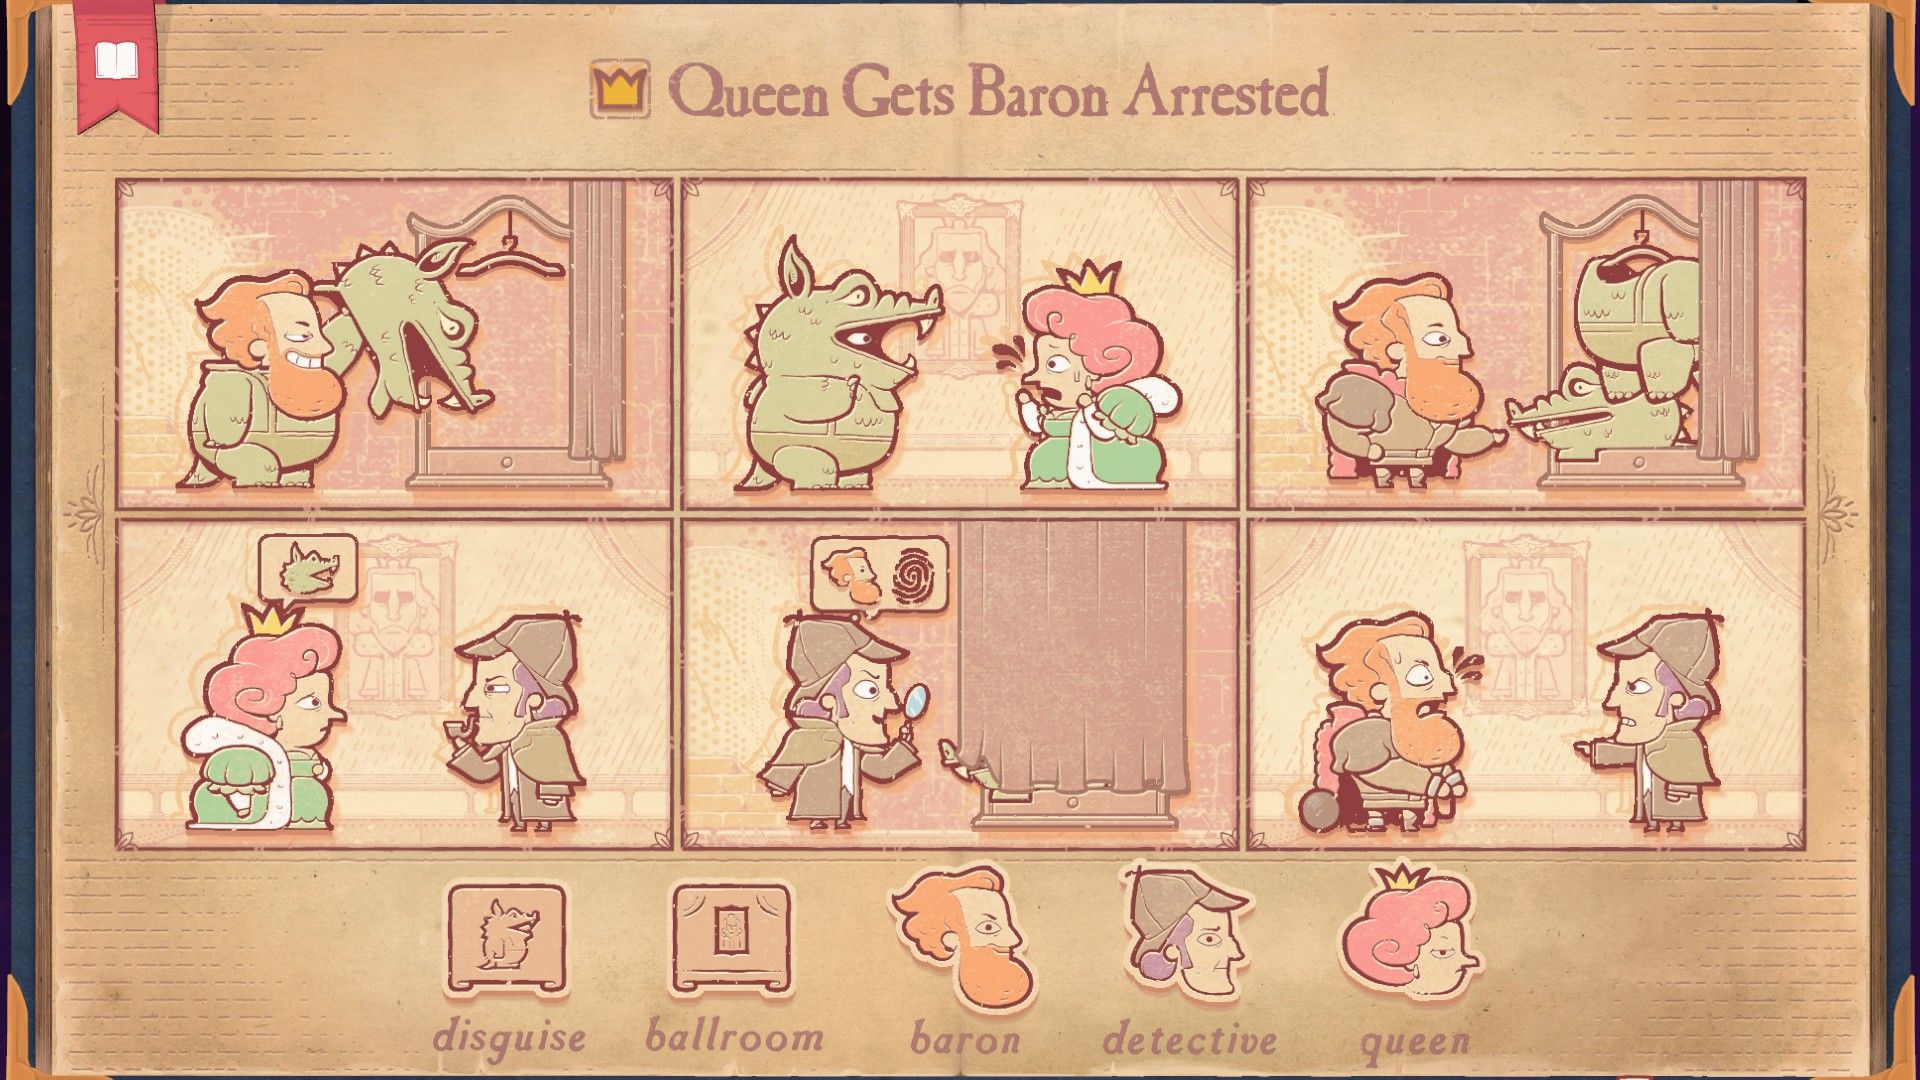 The solution for the Dragon section of Storyteller, showing the Queen having Baron arrested.